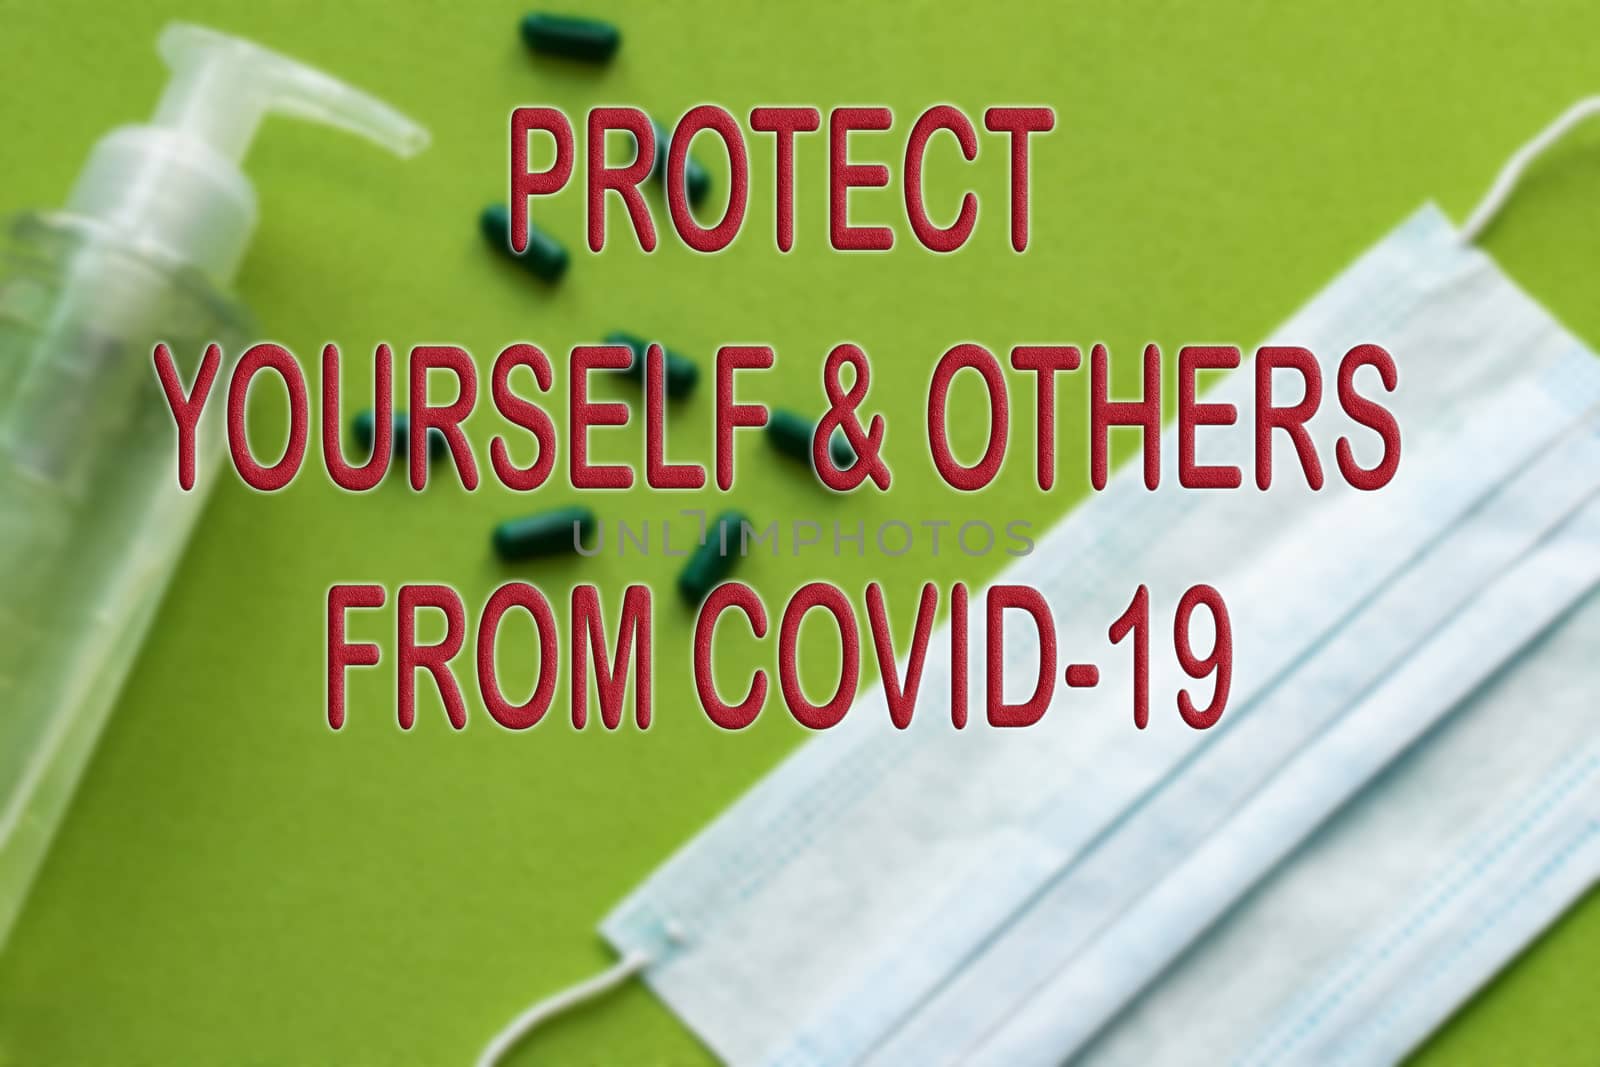 Text about prevention of coronavirus against a background of hand sanitizing gel and medical protective surgical mask on a green background. Hygienic concept of protection from Covid-19